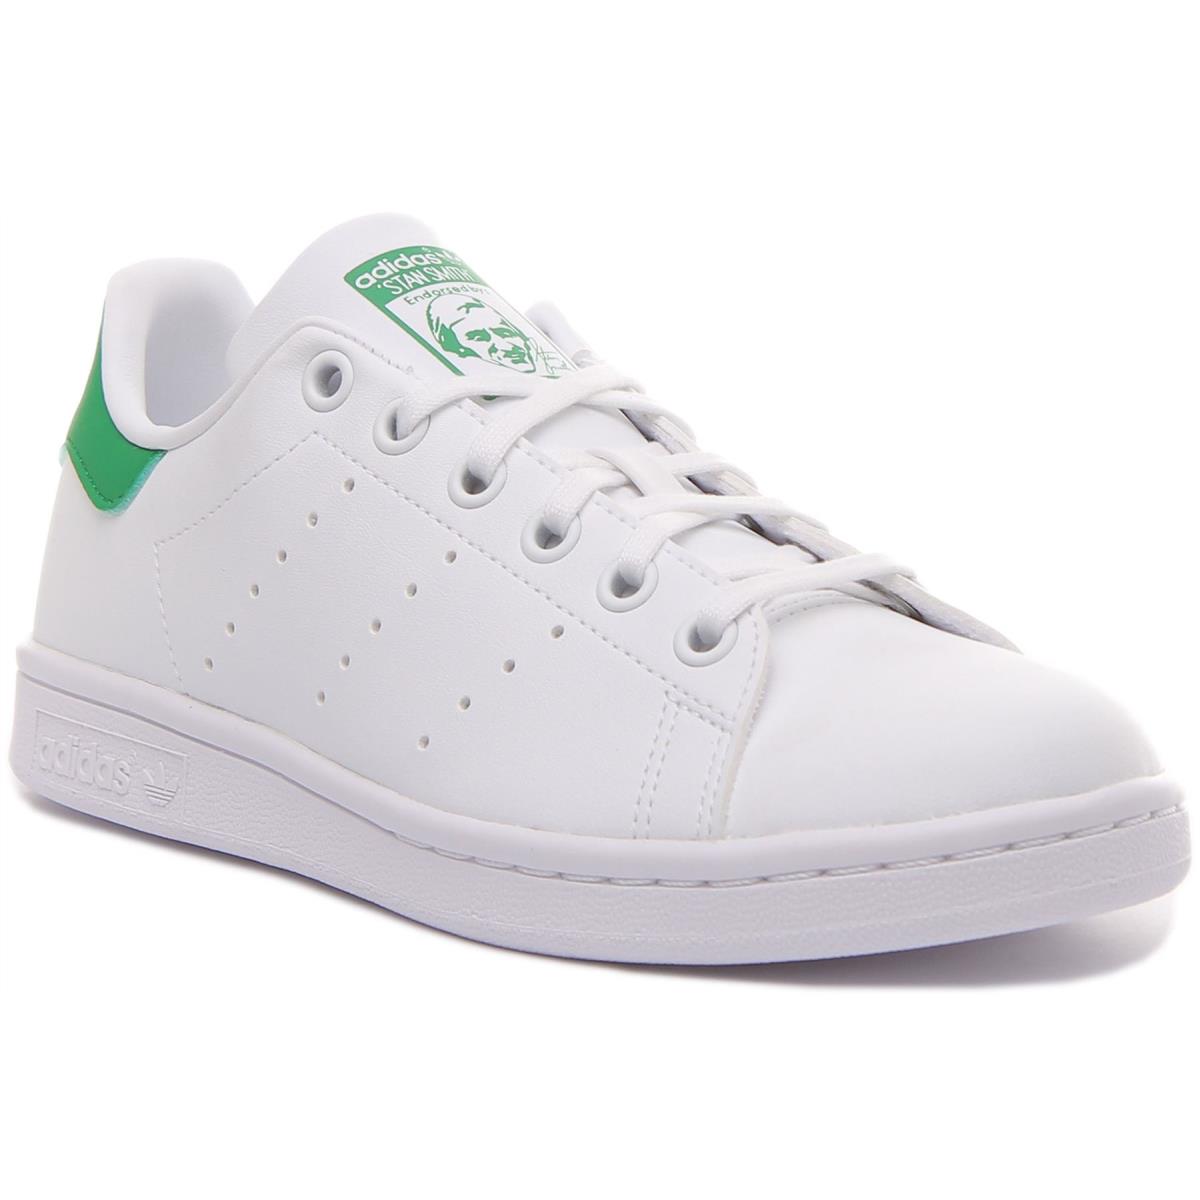 Adidas Stan Smith Junior Classic Tennis Shoe In White Green US Size 3 - 6 WHITE GREEN